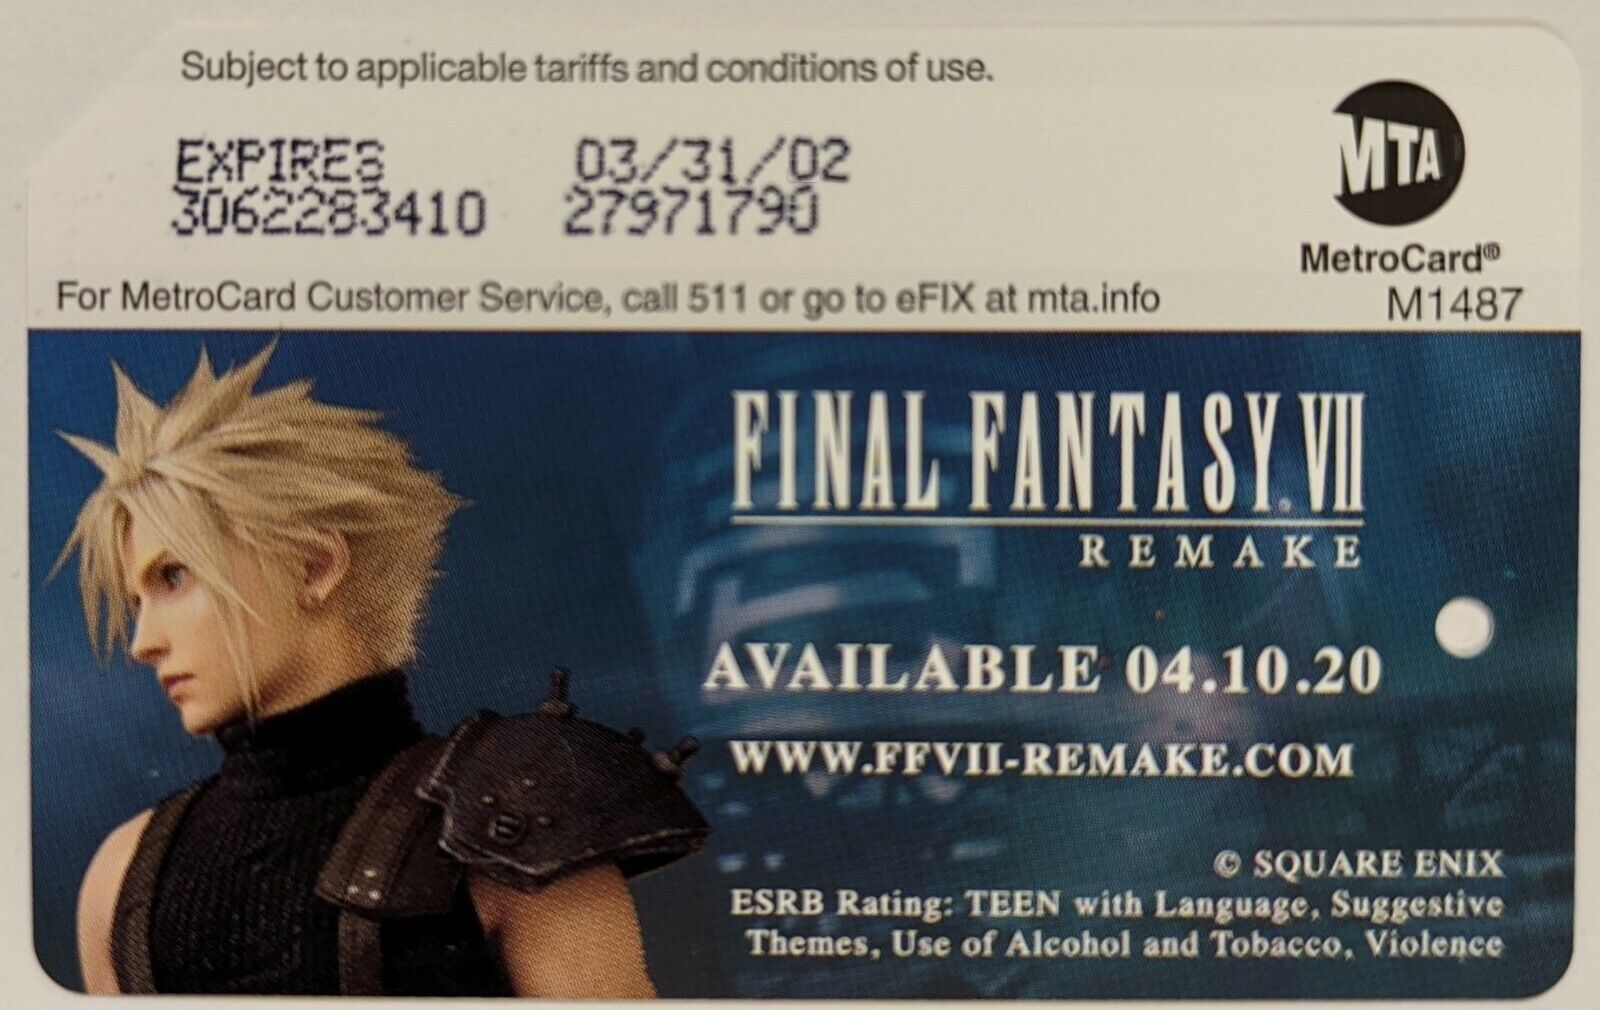 Final Fantasy VII- NYC MetroCard-Expired, Mint condition